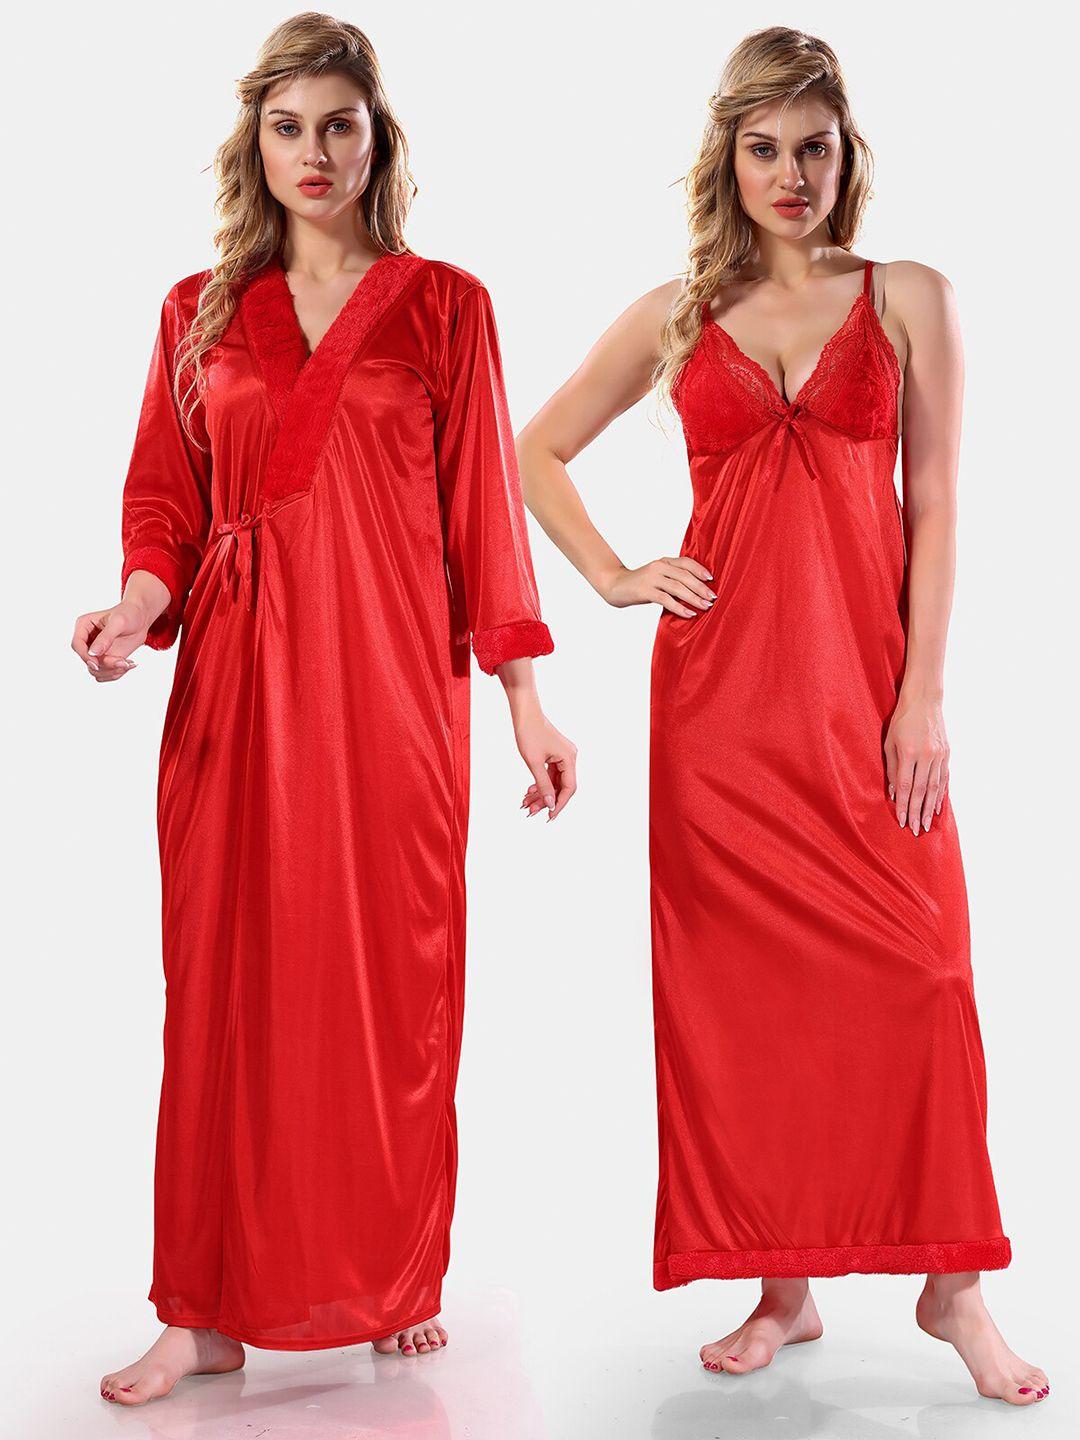 be-you-v-neck-lace-up-details-satin-maxi-nightdress-with-robe